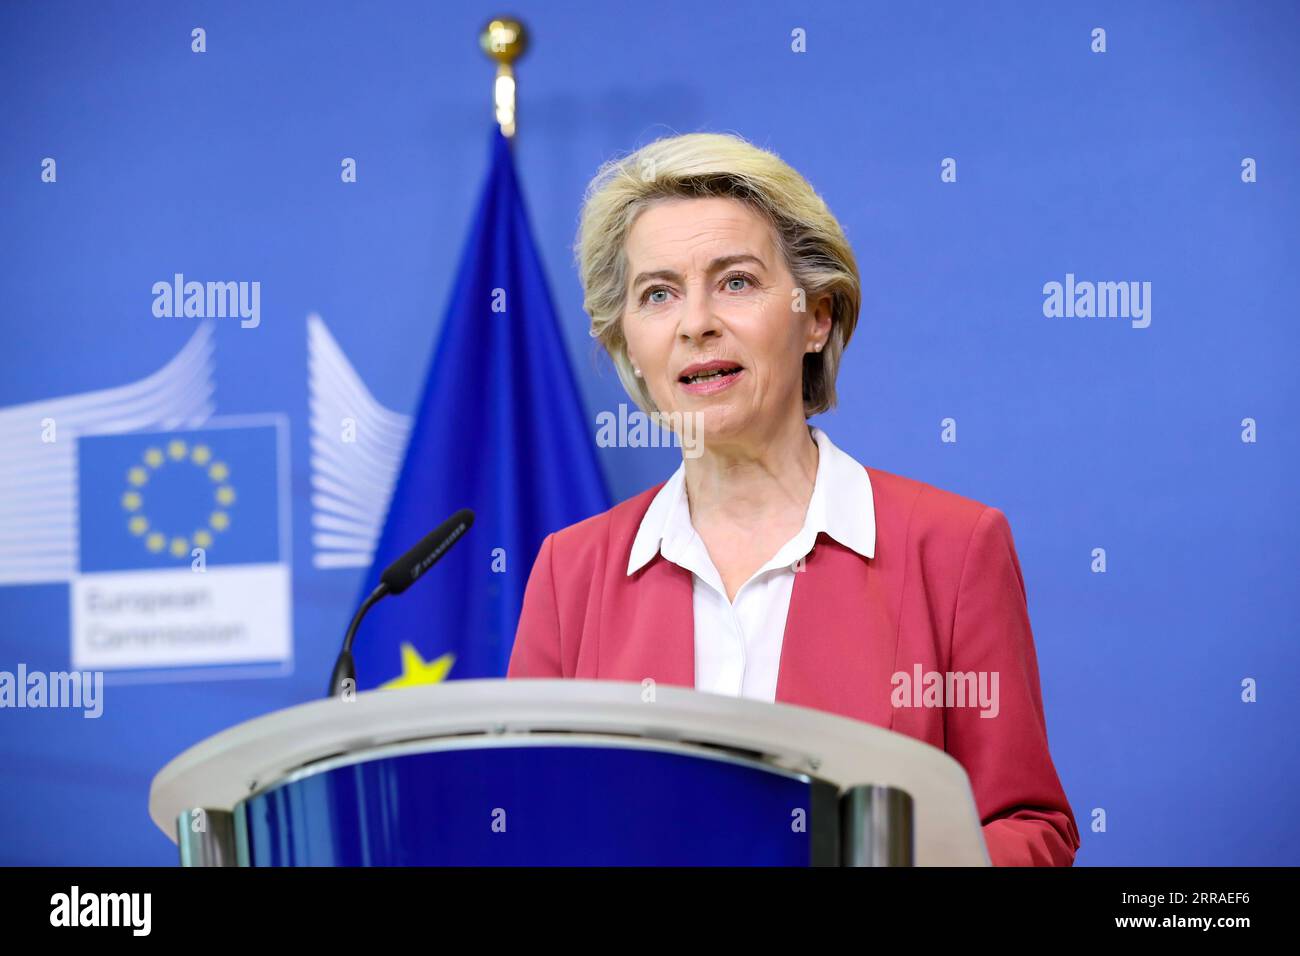 Bilder des Jahres 2021, News 07 Juli News Themen der Woche KW30 News Bilder des Tages 210727 -- BRUSSELS, July 27, 2021 -- European Commission President Ursula von der Leyen makes a statement on the European Union EU Vaccines Strategy in Brussels, Belgium, July 27, 2021. Seventy percent of adults in EU have received at least one vaccine dose against COVID-19, she said on Tuesday.  BELGIUM-BRUSSELS-EU-COVID-19-VACCINATION ZhangxCheng PUBLICATIONxNOTxINxCHN Stock Photo